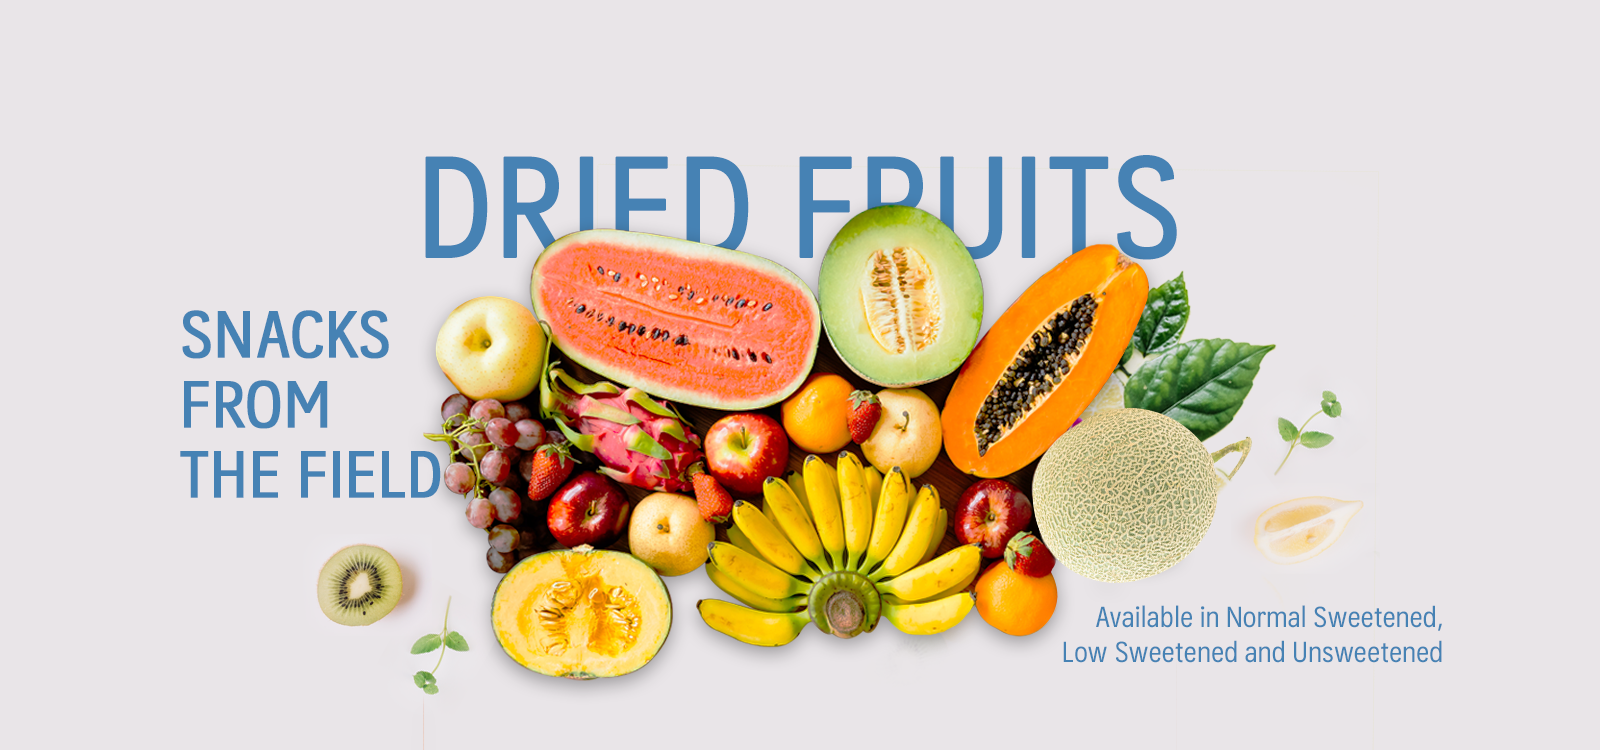 The World of Dried Fruits is just right at your fingertips